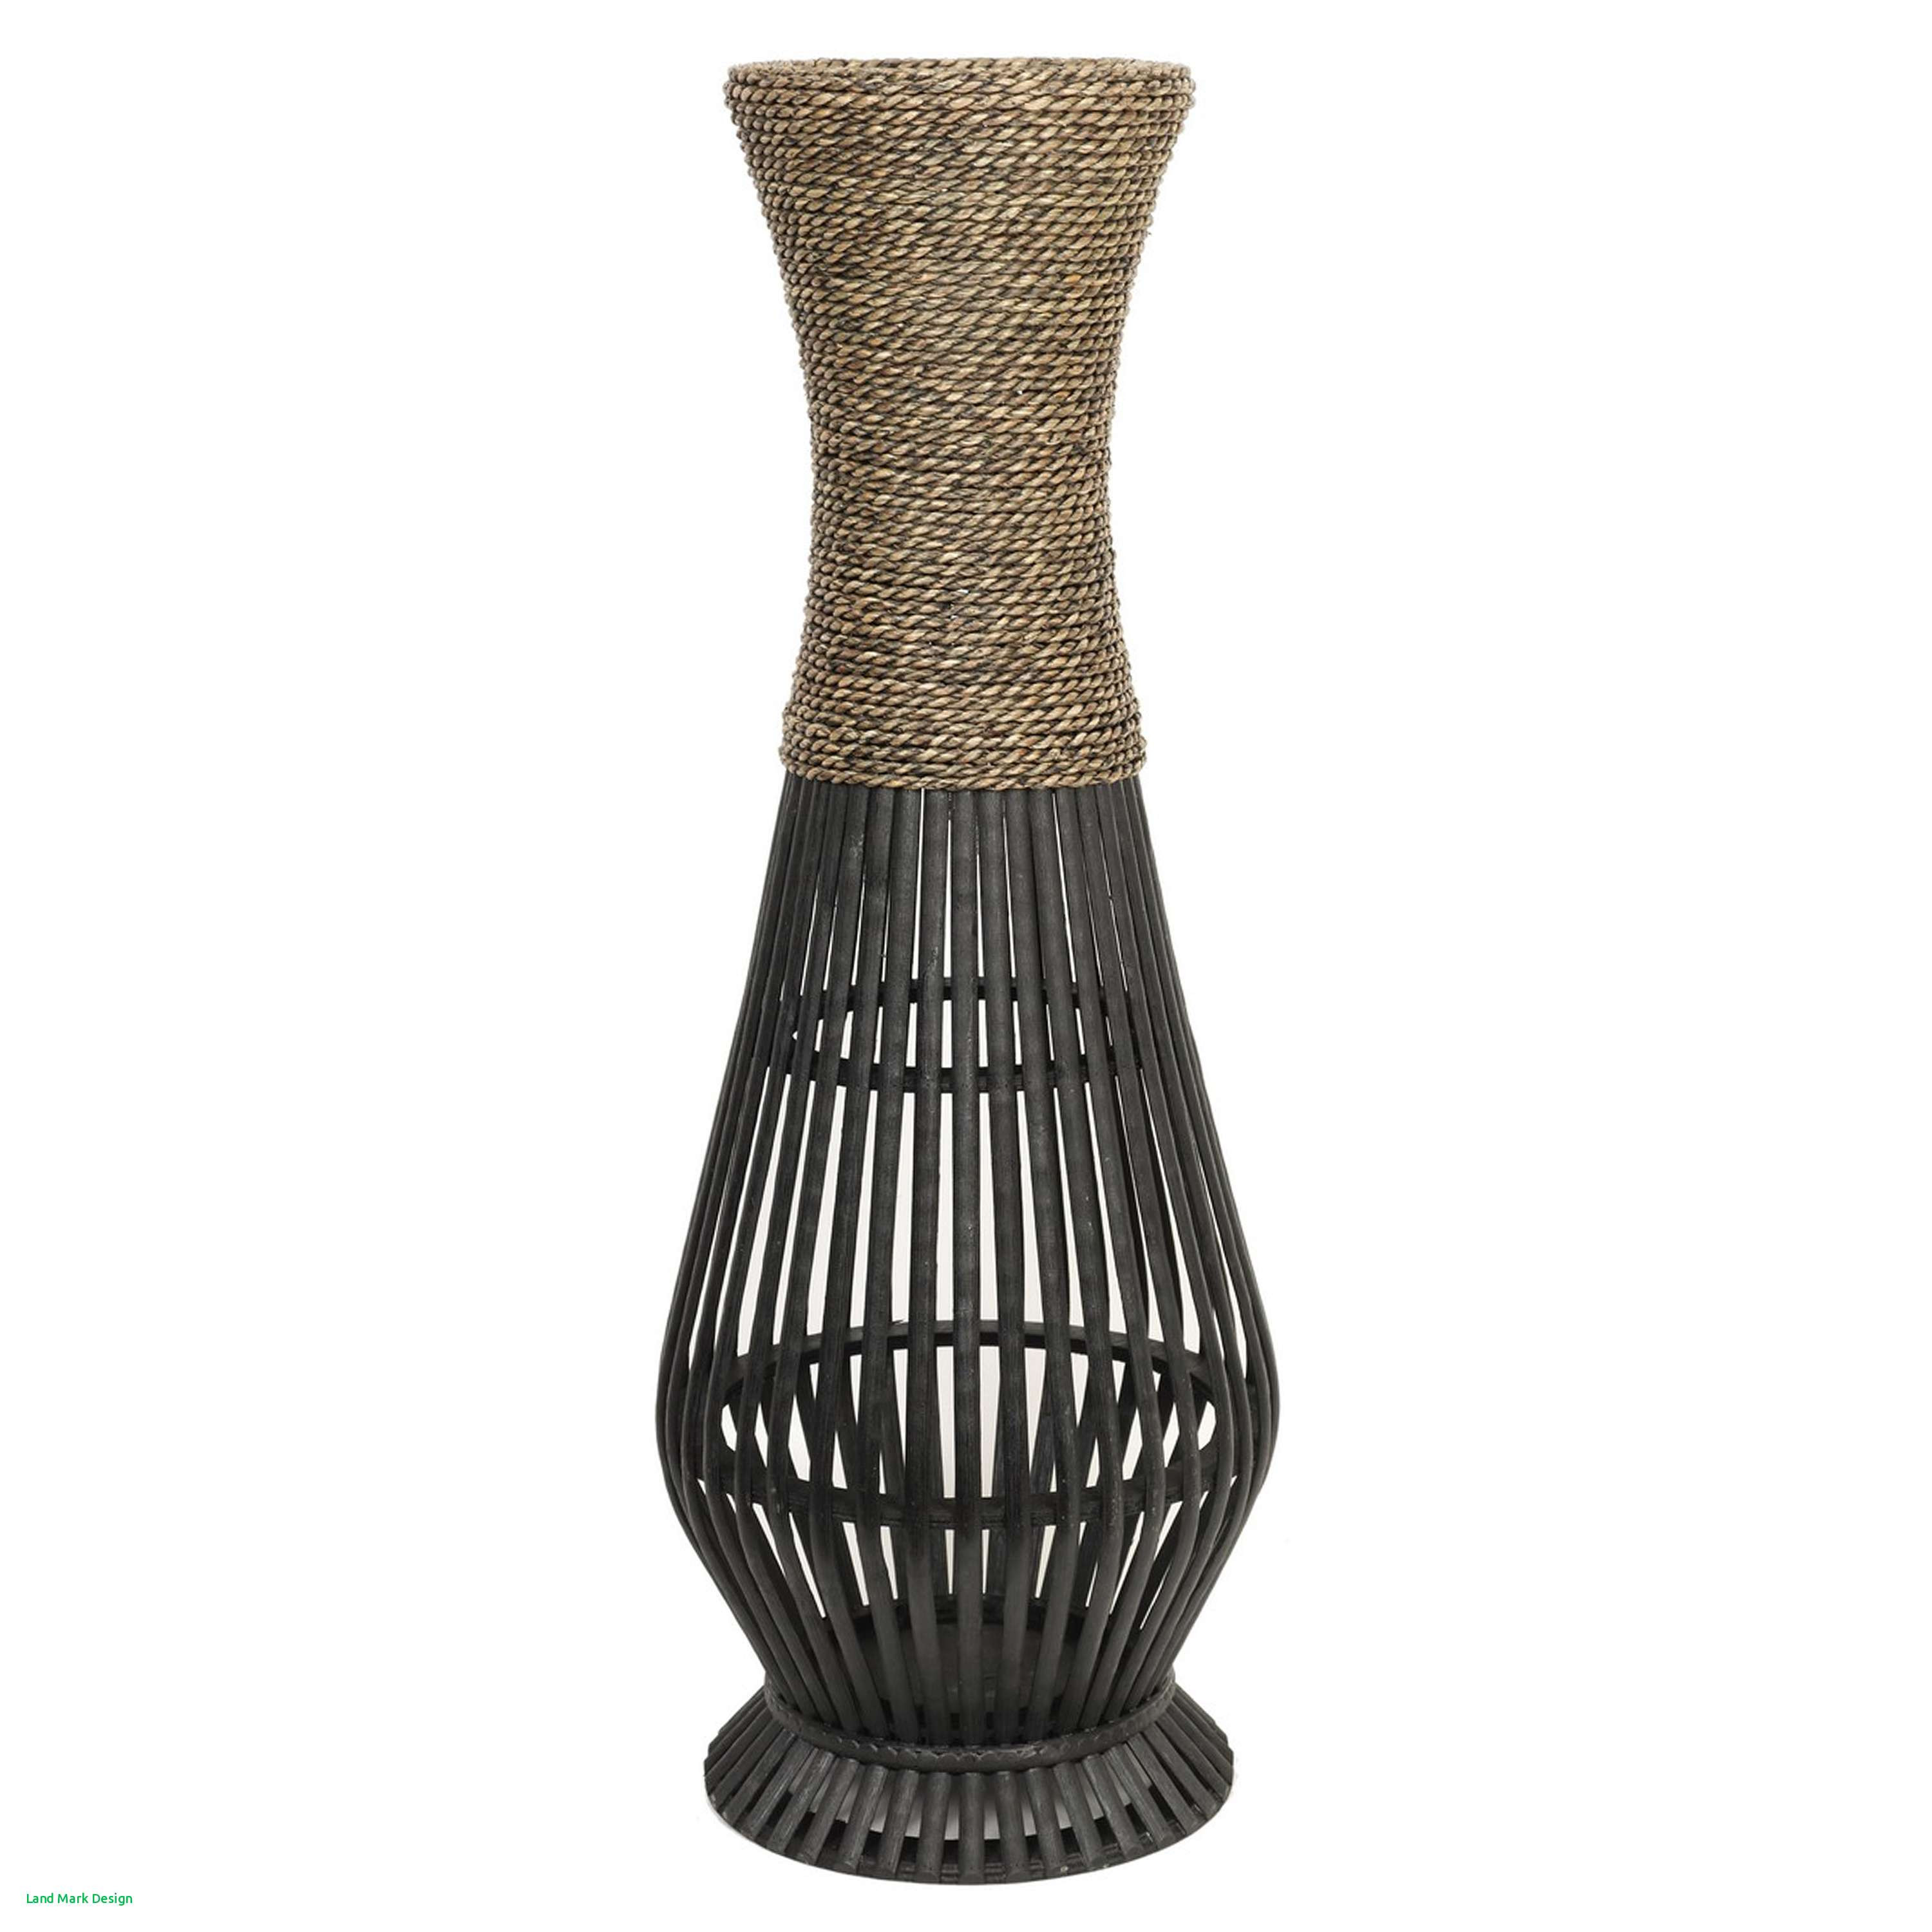 15 Spectacular Rustic Wooden Vases Uk 2024 free download rustic wooden vases uk of images of tall wooden vase vases artificial plants collection in tall wooden vase stock tall wicker vase design of images of tall wooden vase